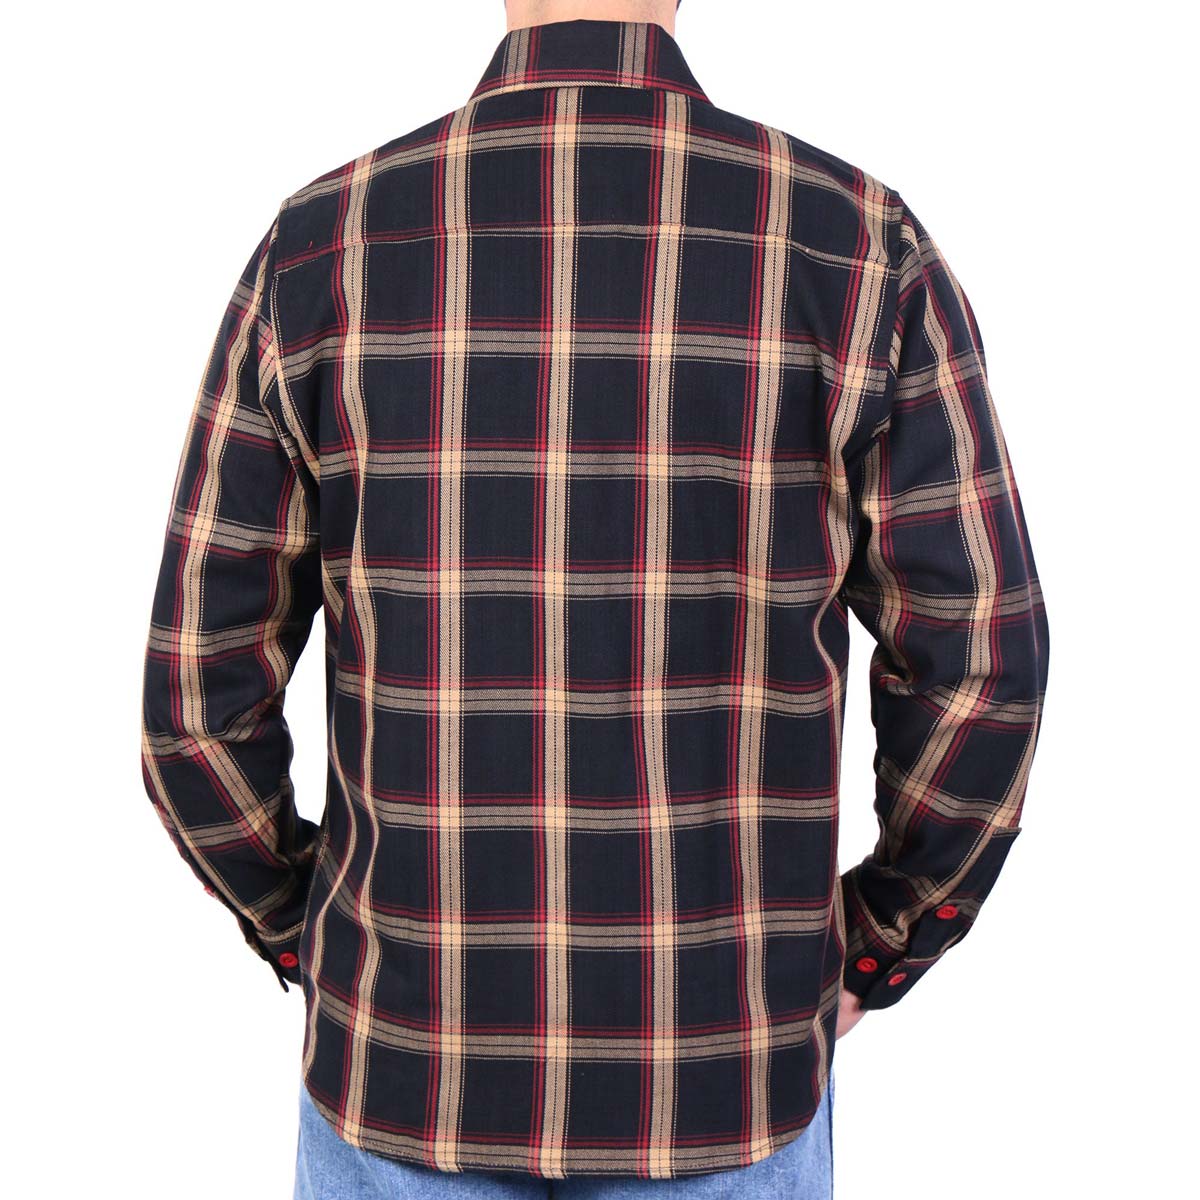 Hot Leathers FLM2038 Men's Black Tan and Red Long Sleeve Flannel Shirt